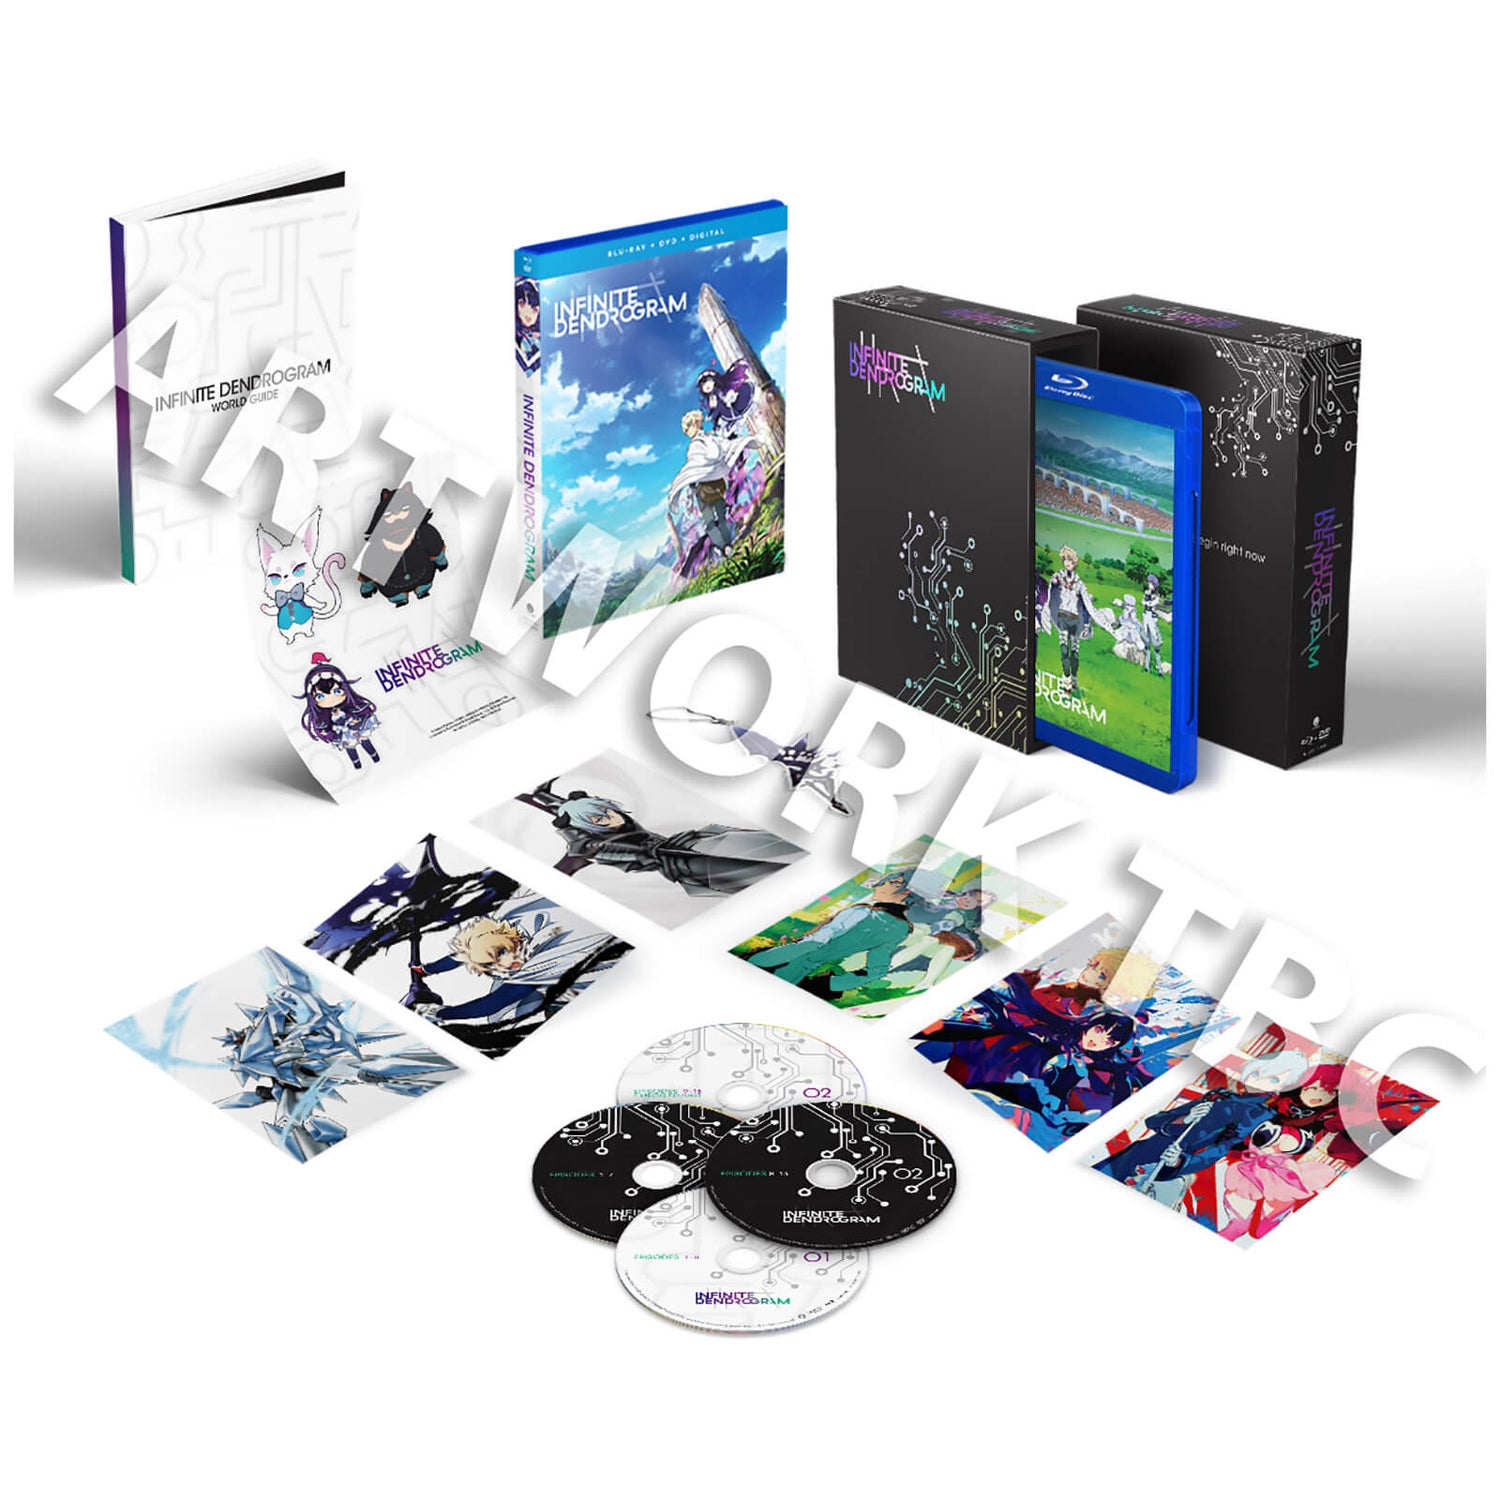 Infinite Dendrogram Complete Serie - Limited Edition